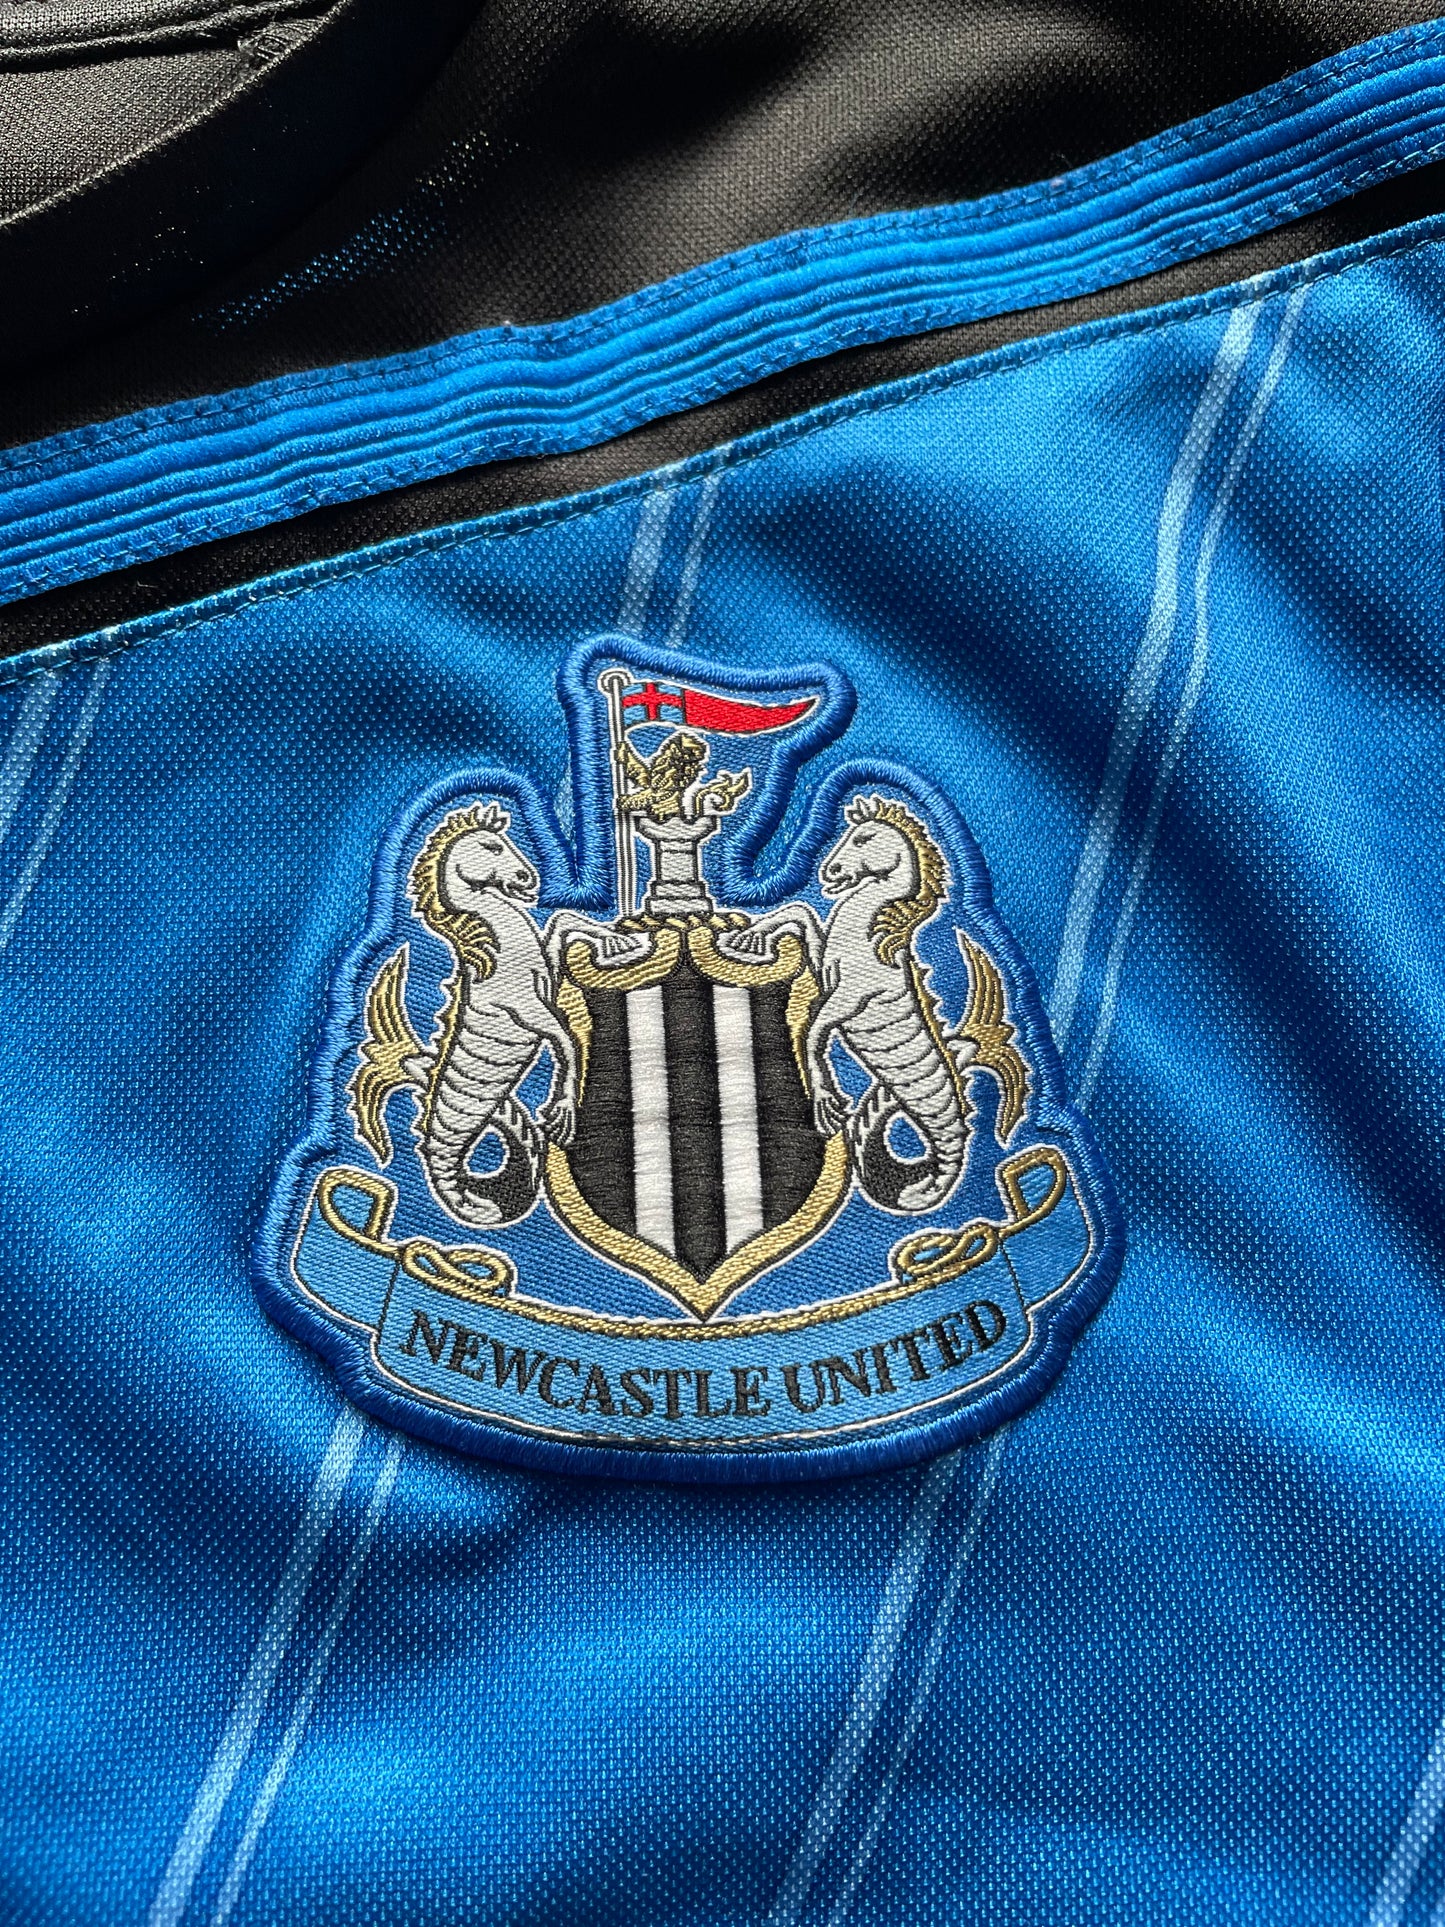 Newcastle 2011 Training Shirt (very good) Adults XS / Youths see below